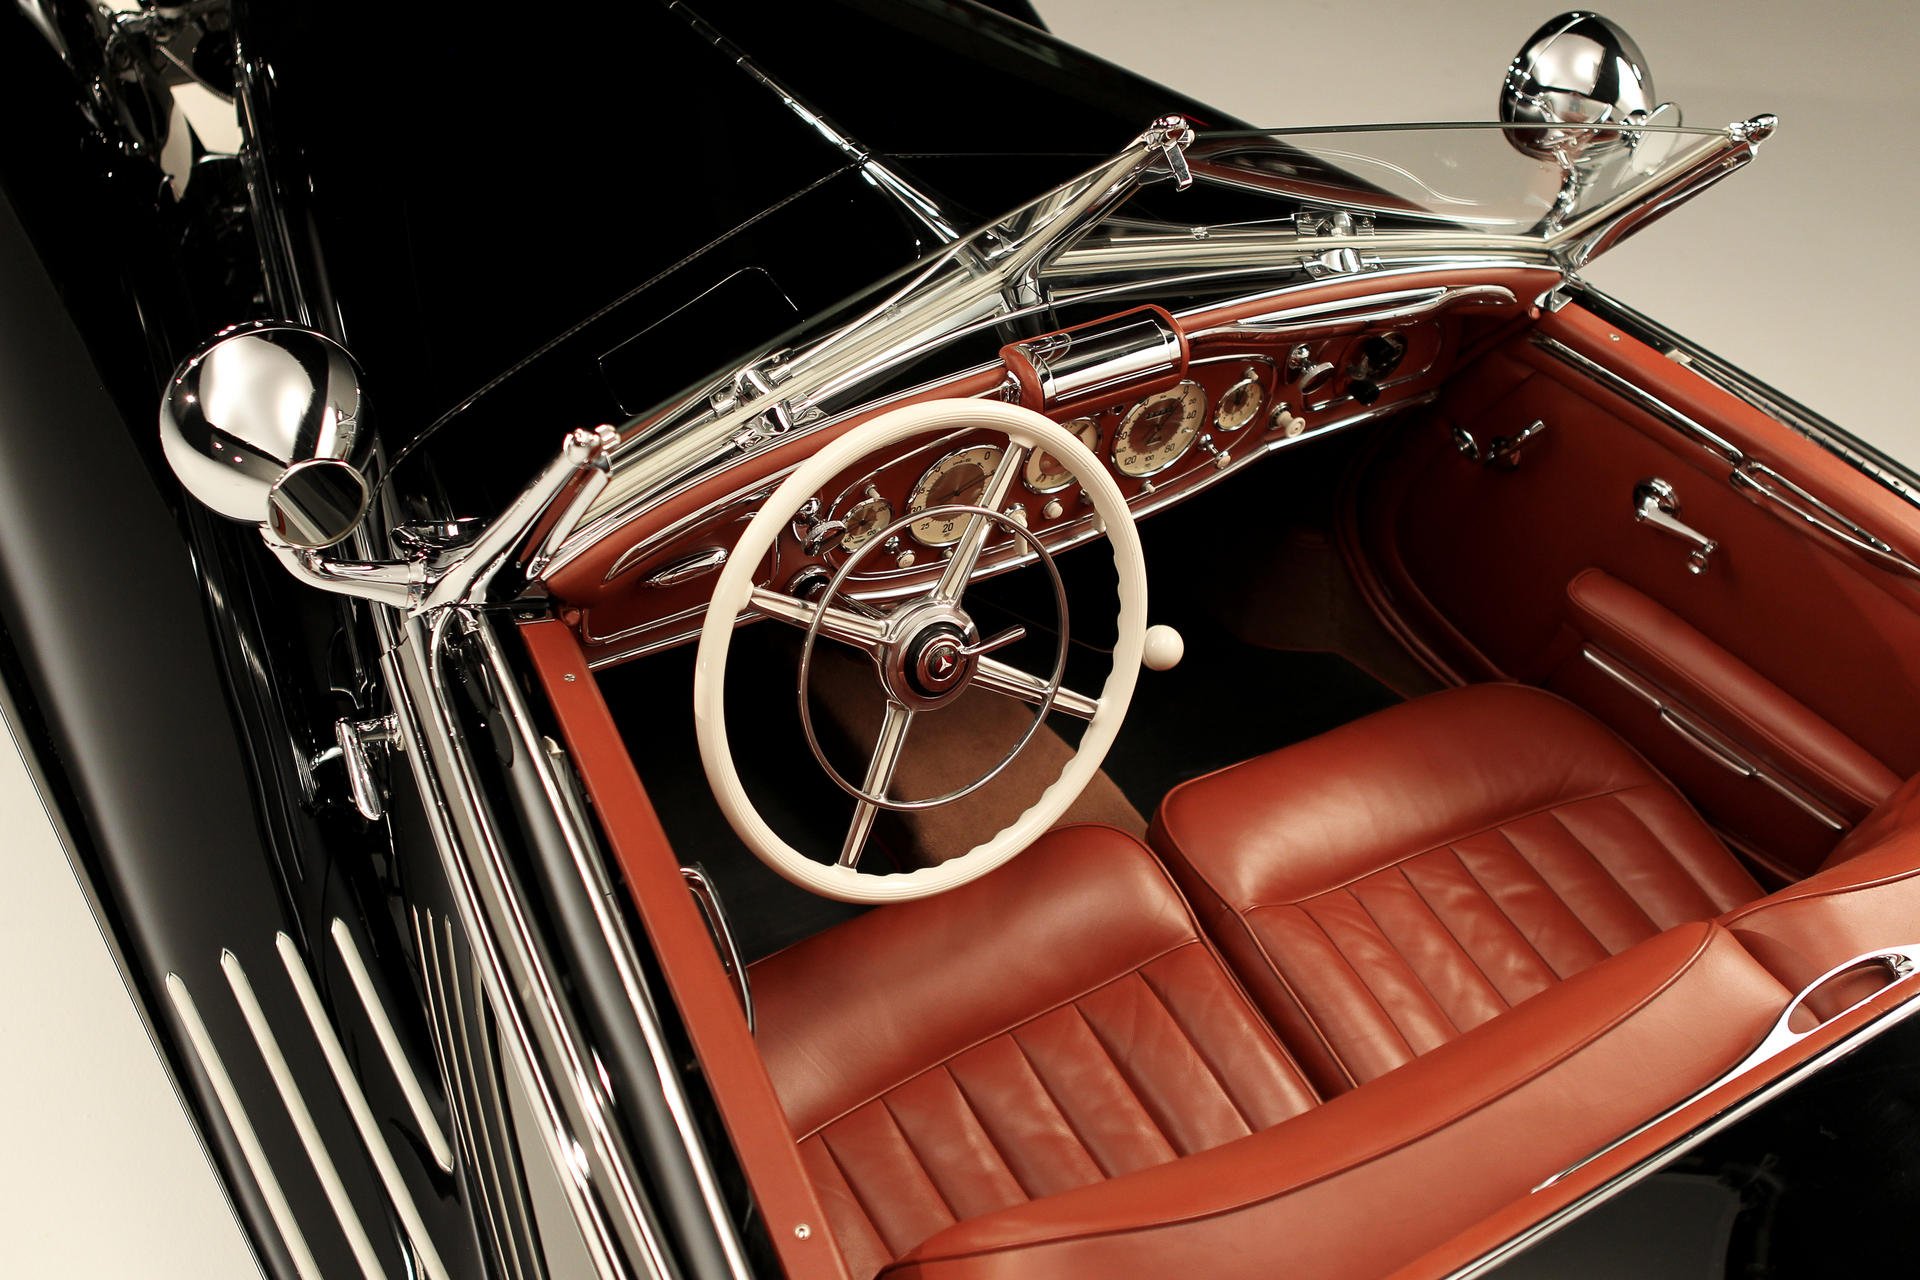 Rare Mercedes 1936 540K Special Roadster goes on auction | South China Morning Post